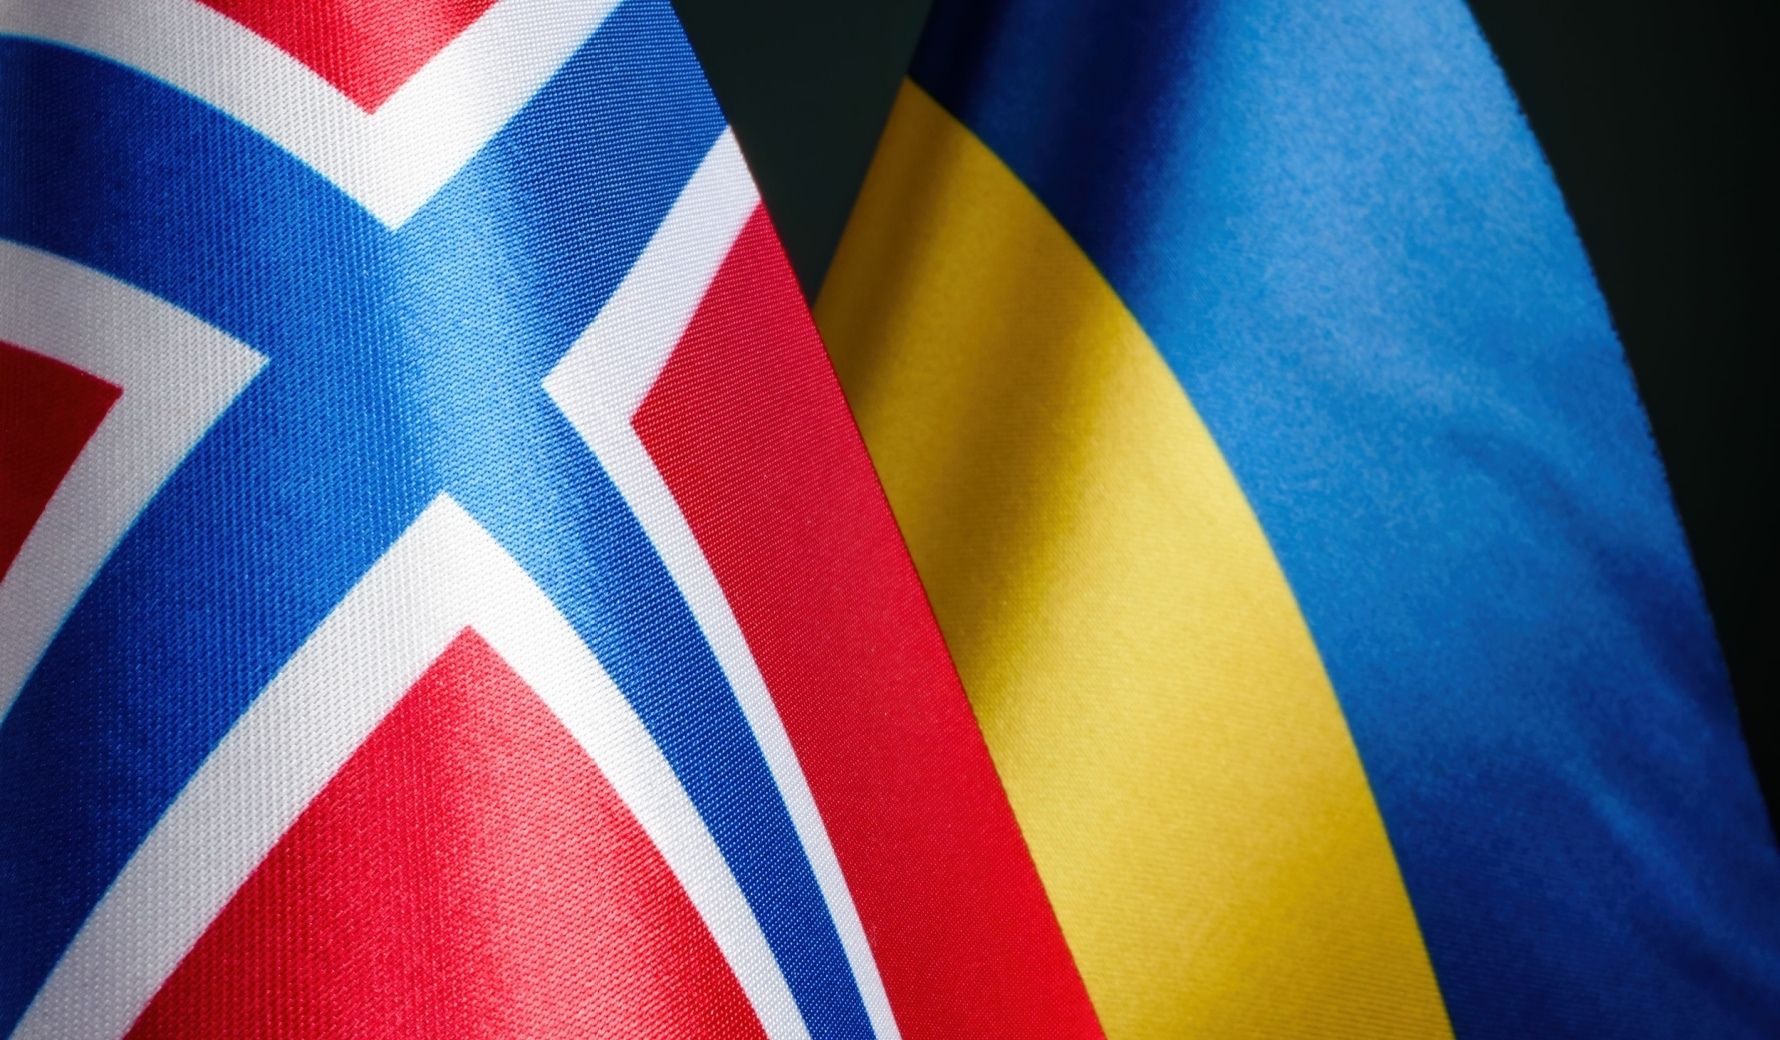 Flags of Norway and Ukraine.